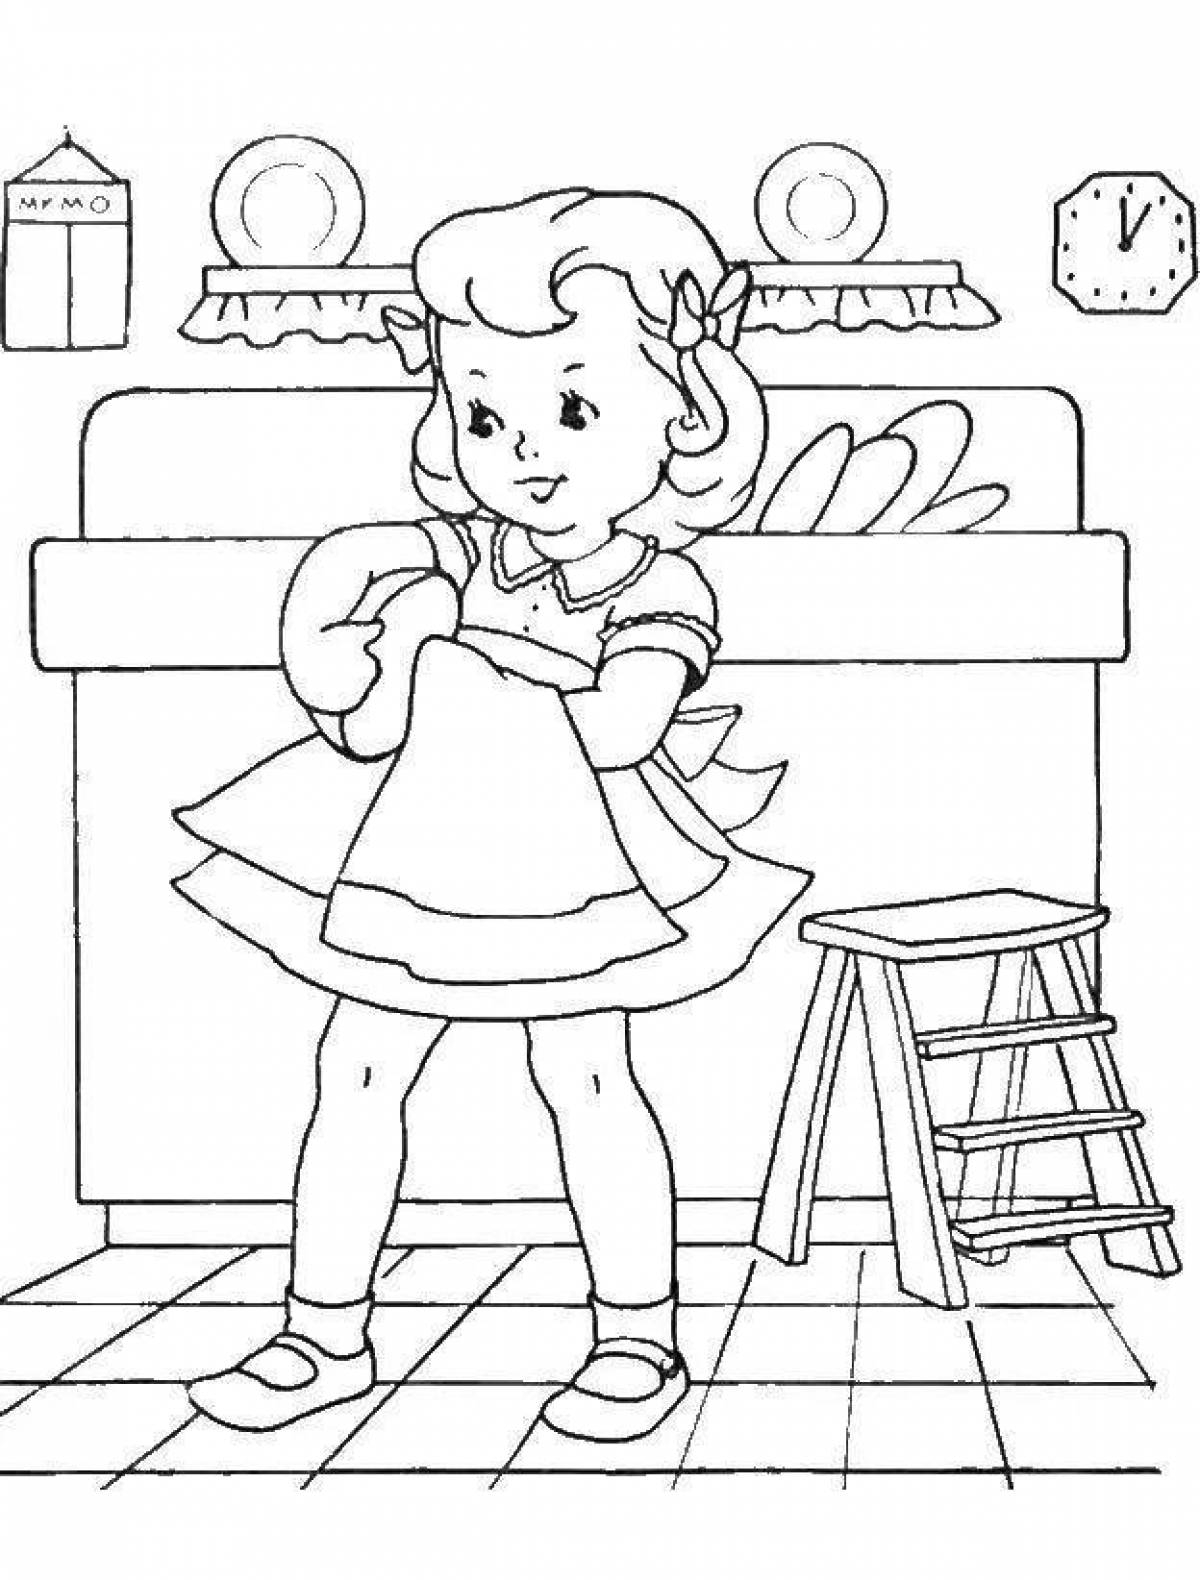 Playful coloring page before